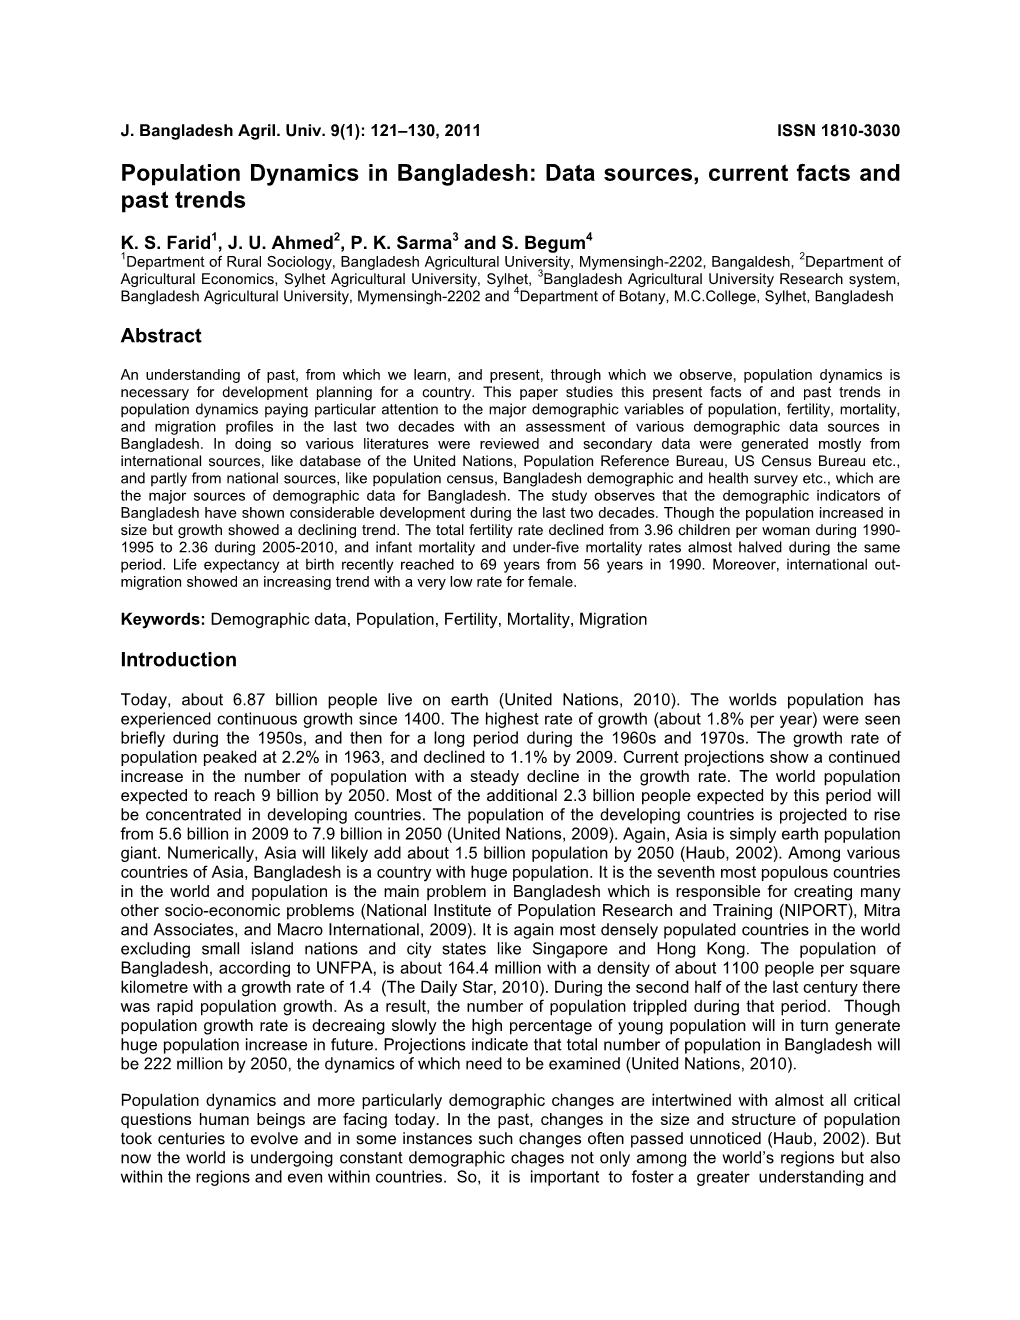 Population Dynamics in Bangladesh: Data Sources, Current Facts and Past Trends